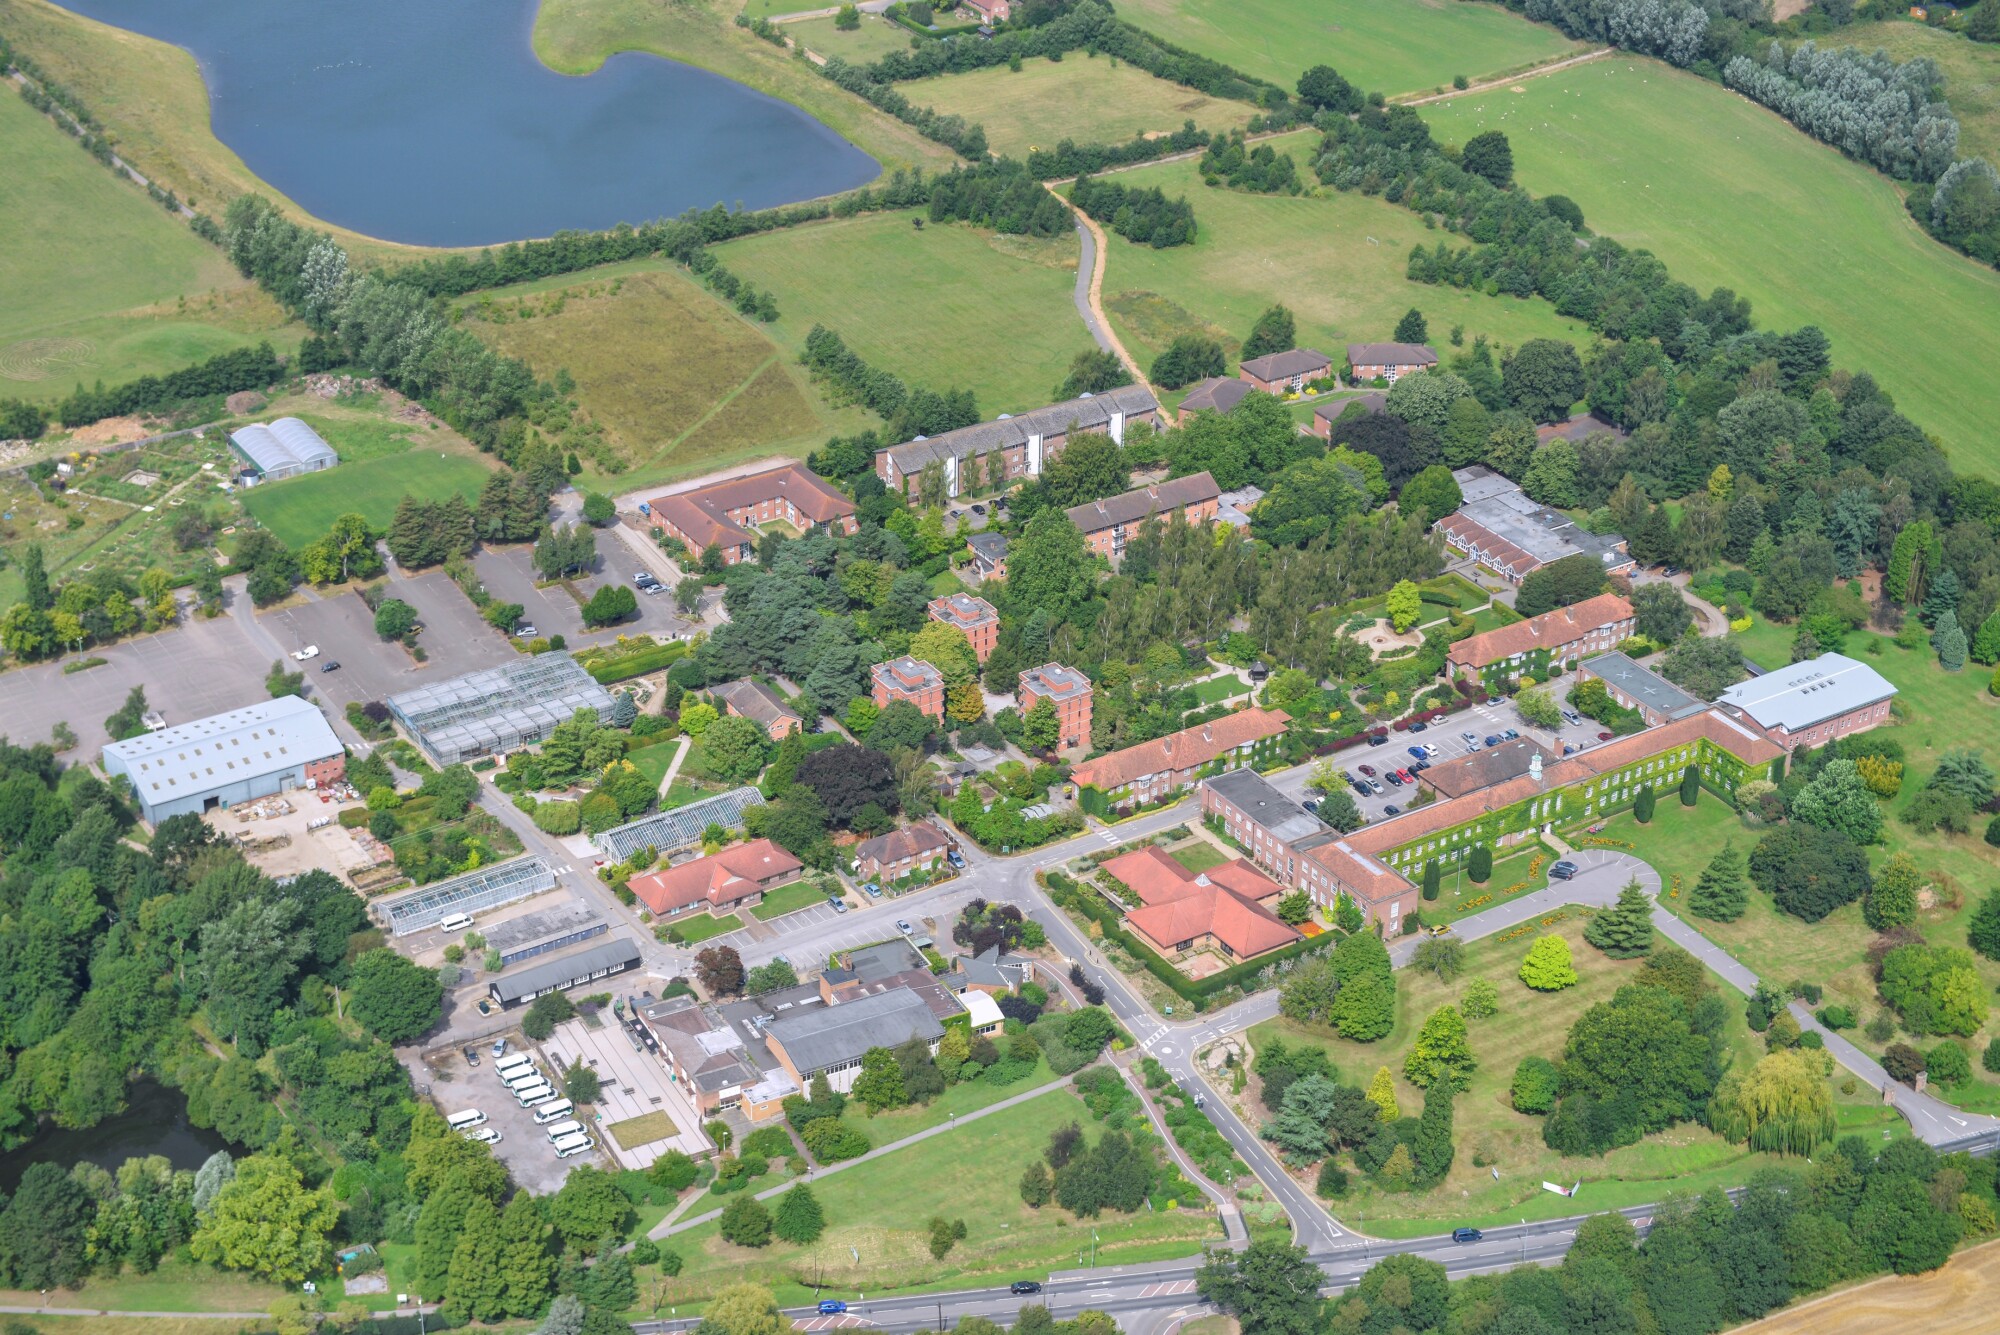 Aerial view of Writtle University College (WUC) in Essex has announced the launch of an innovative new MBA. 'Regenerative Food Systems' is currently accepting applications for autumn 2021.